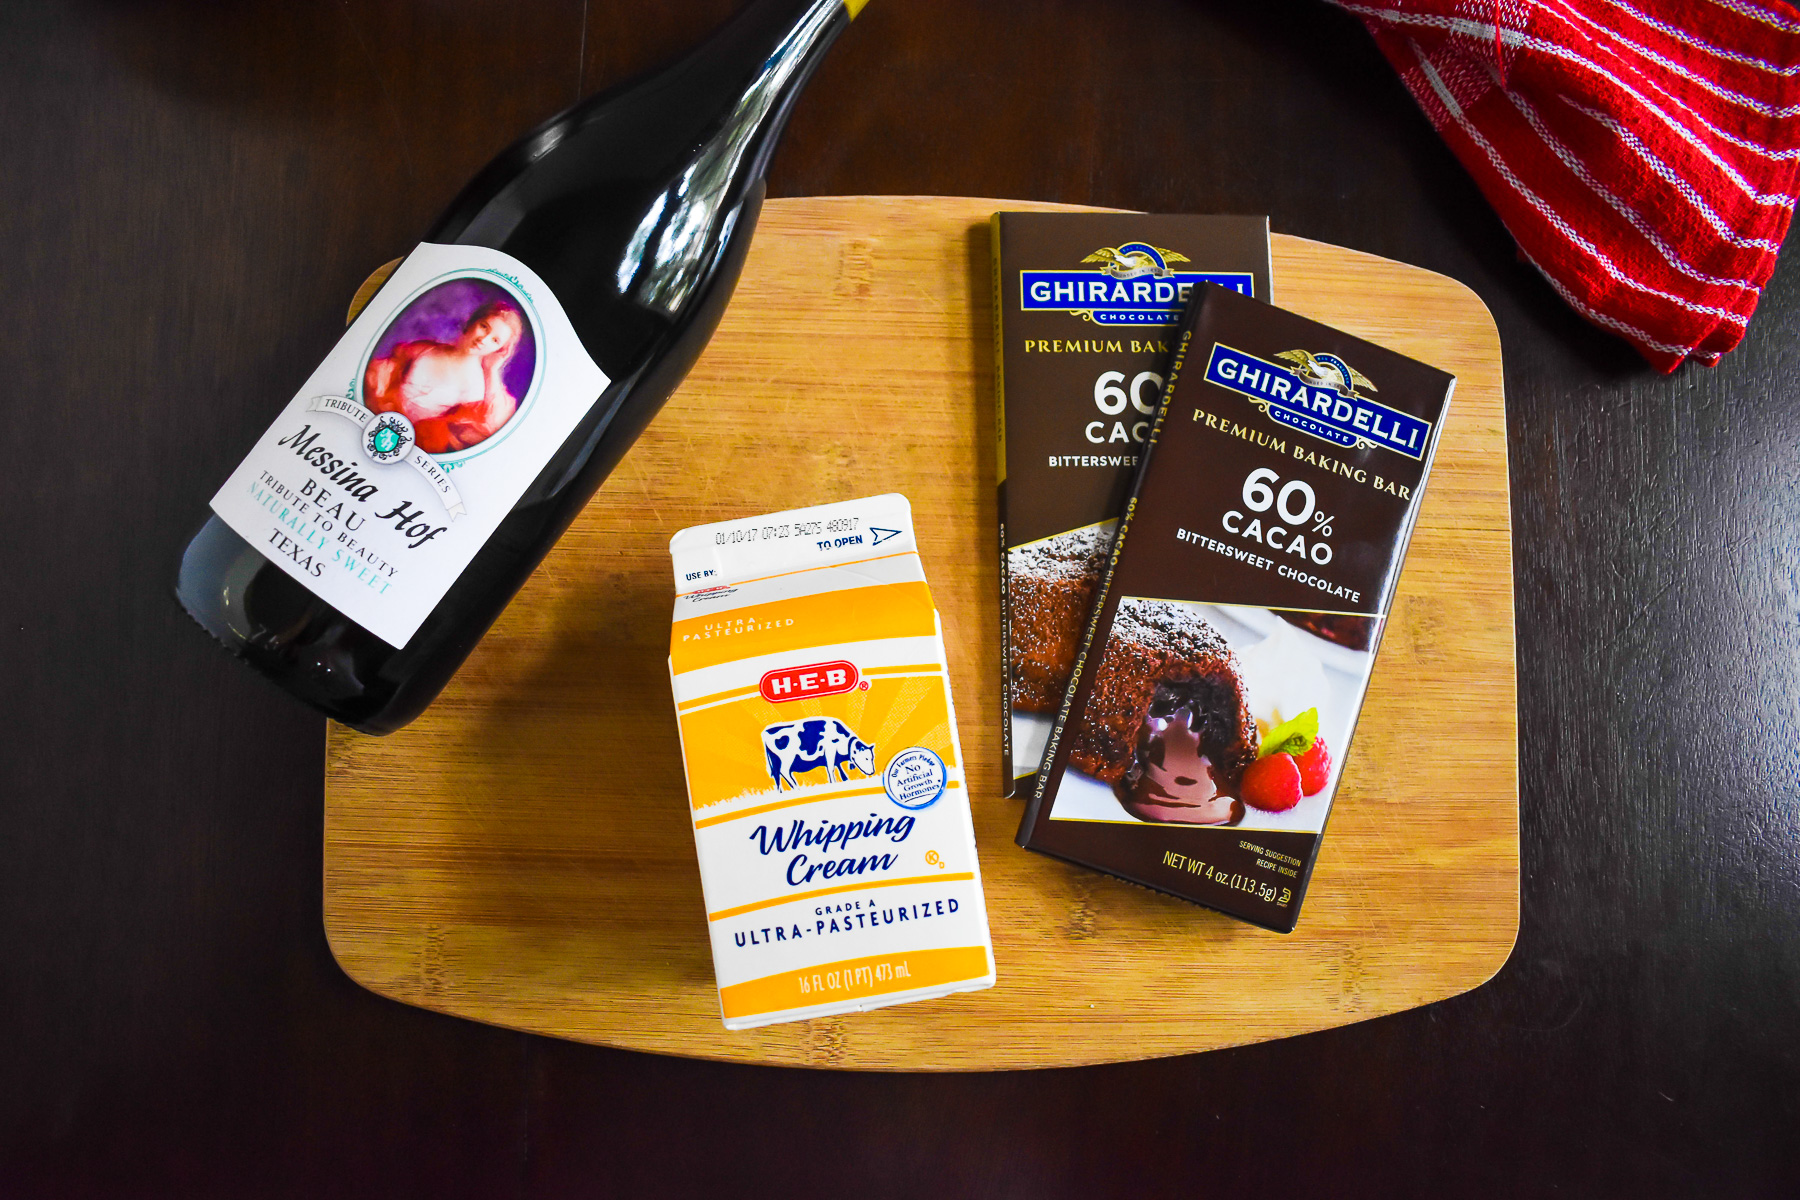 bottle of red wine, carton of whipping cream and bars of bittersweet chocolate on wooden cutting board.